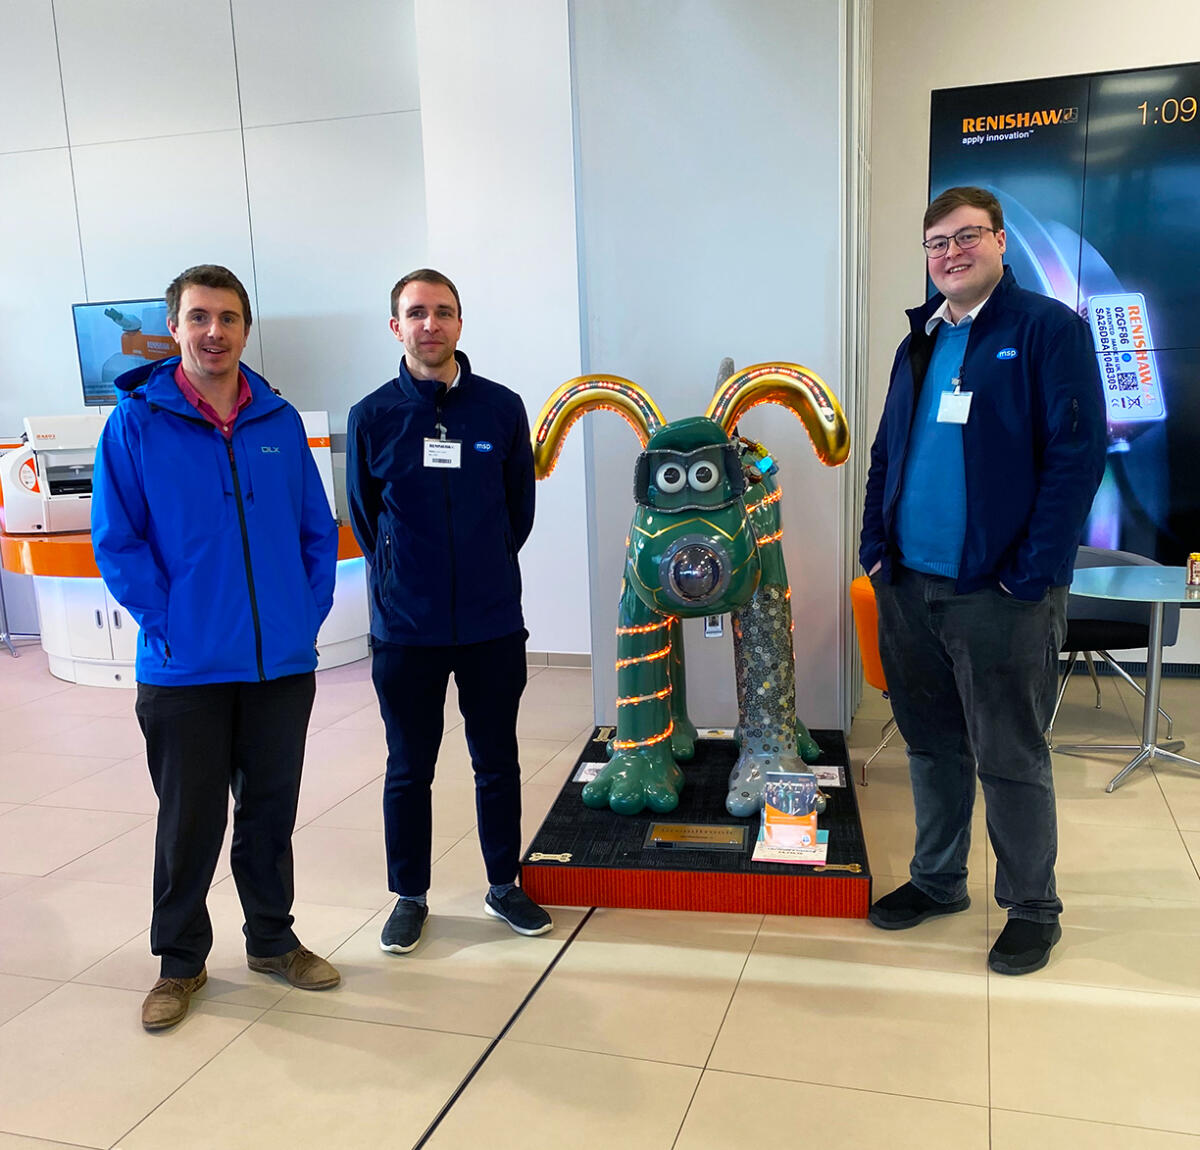 Jack and Alex at Renishaw with Gromitronic and Matt Lorkin from Renishaw